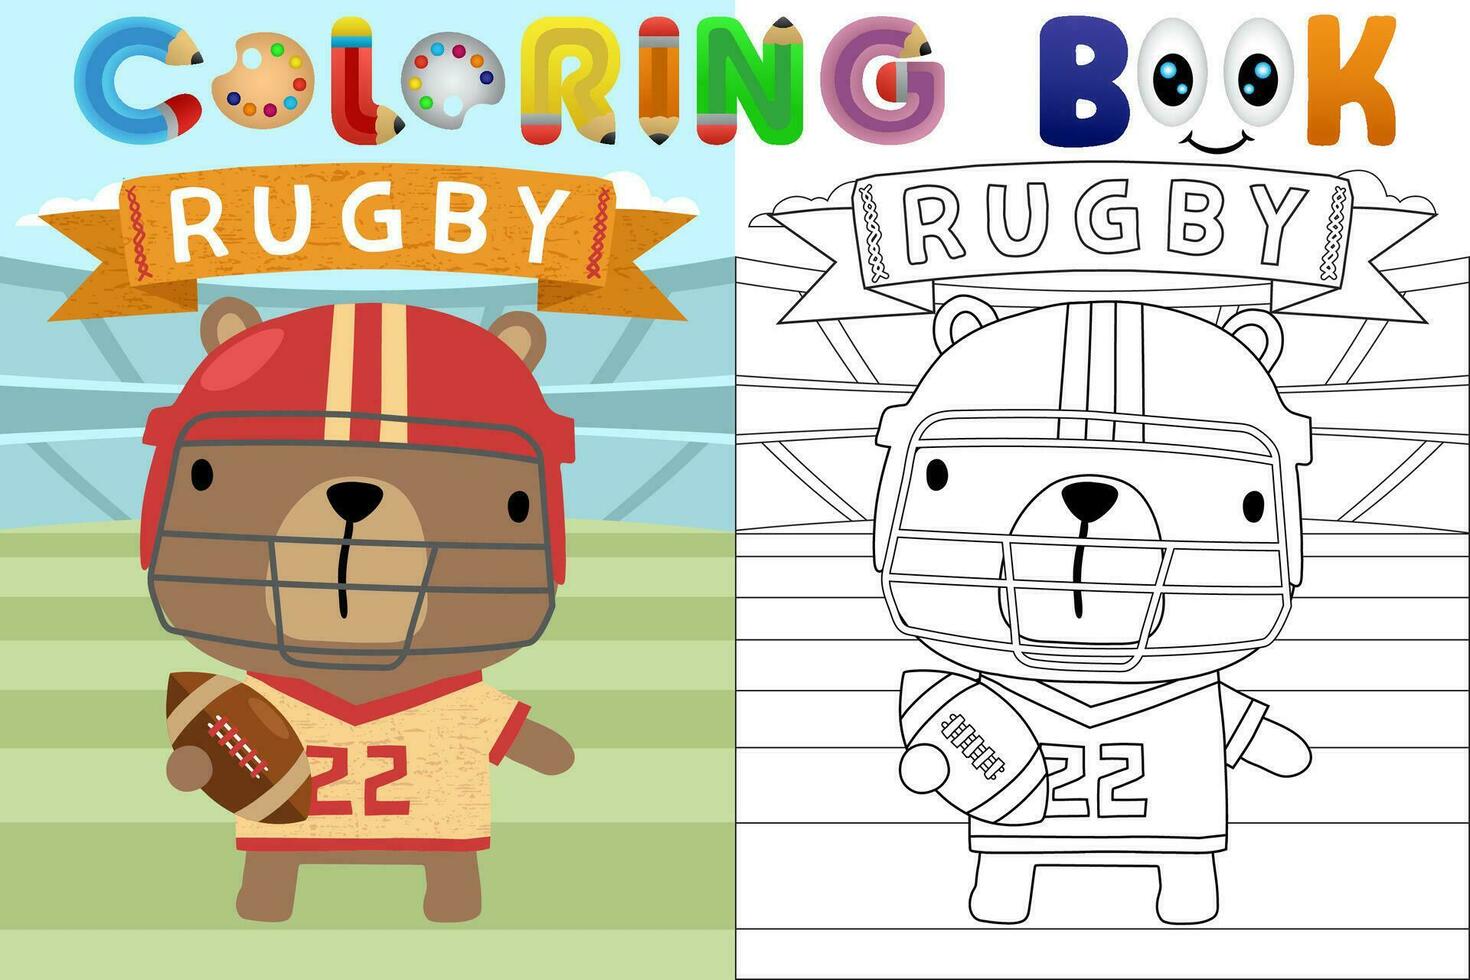 Vector cartoon illustration, cute bear in rugby uniform with ball in stadium, coloring book or page